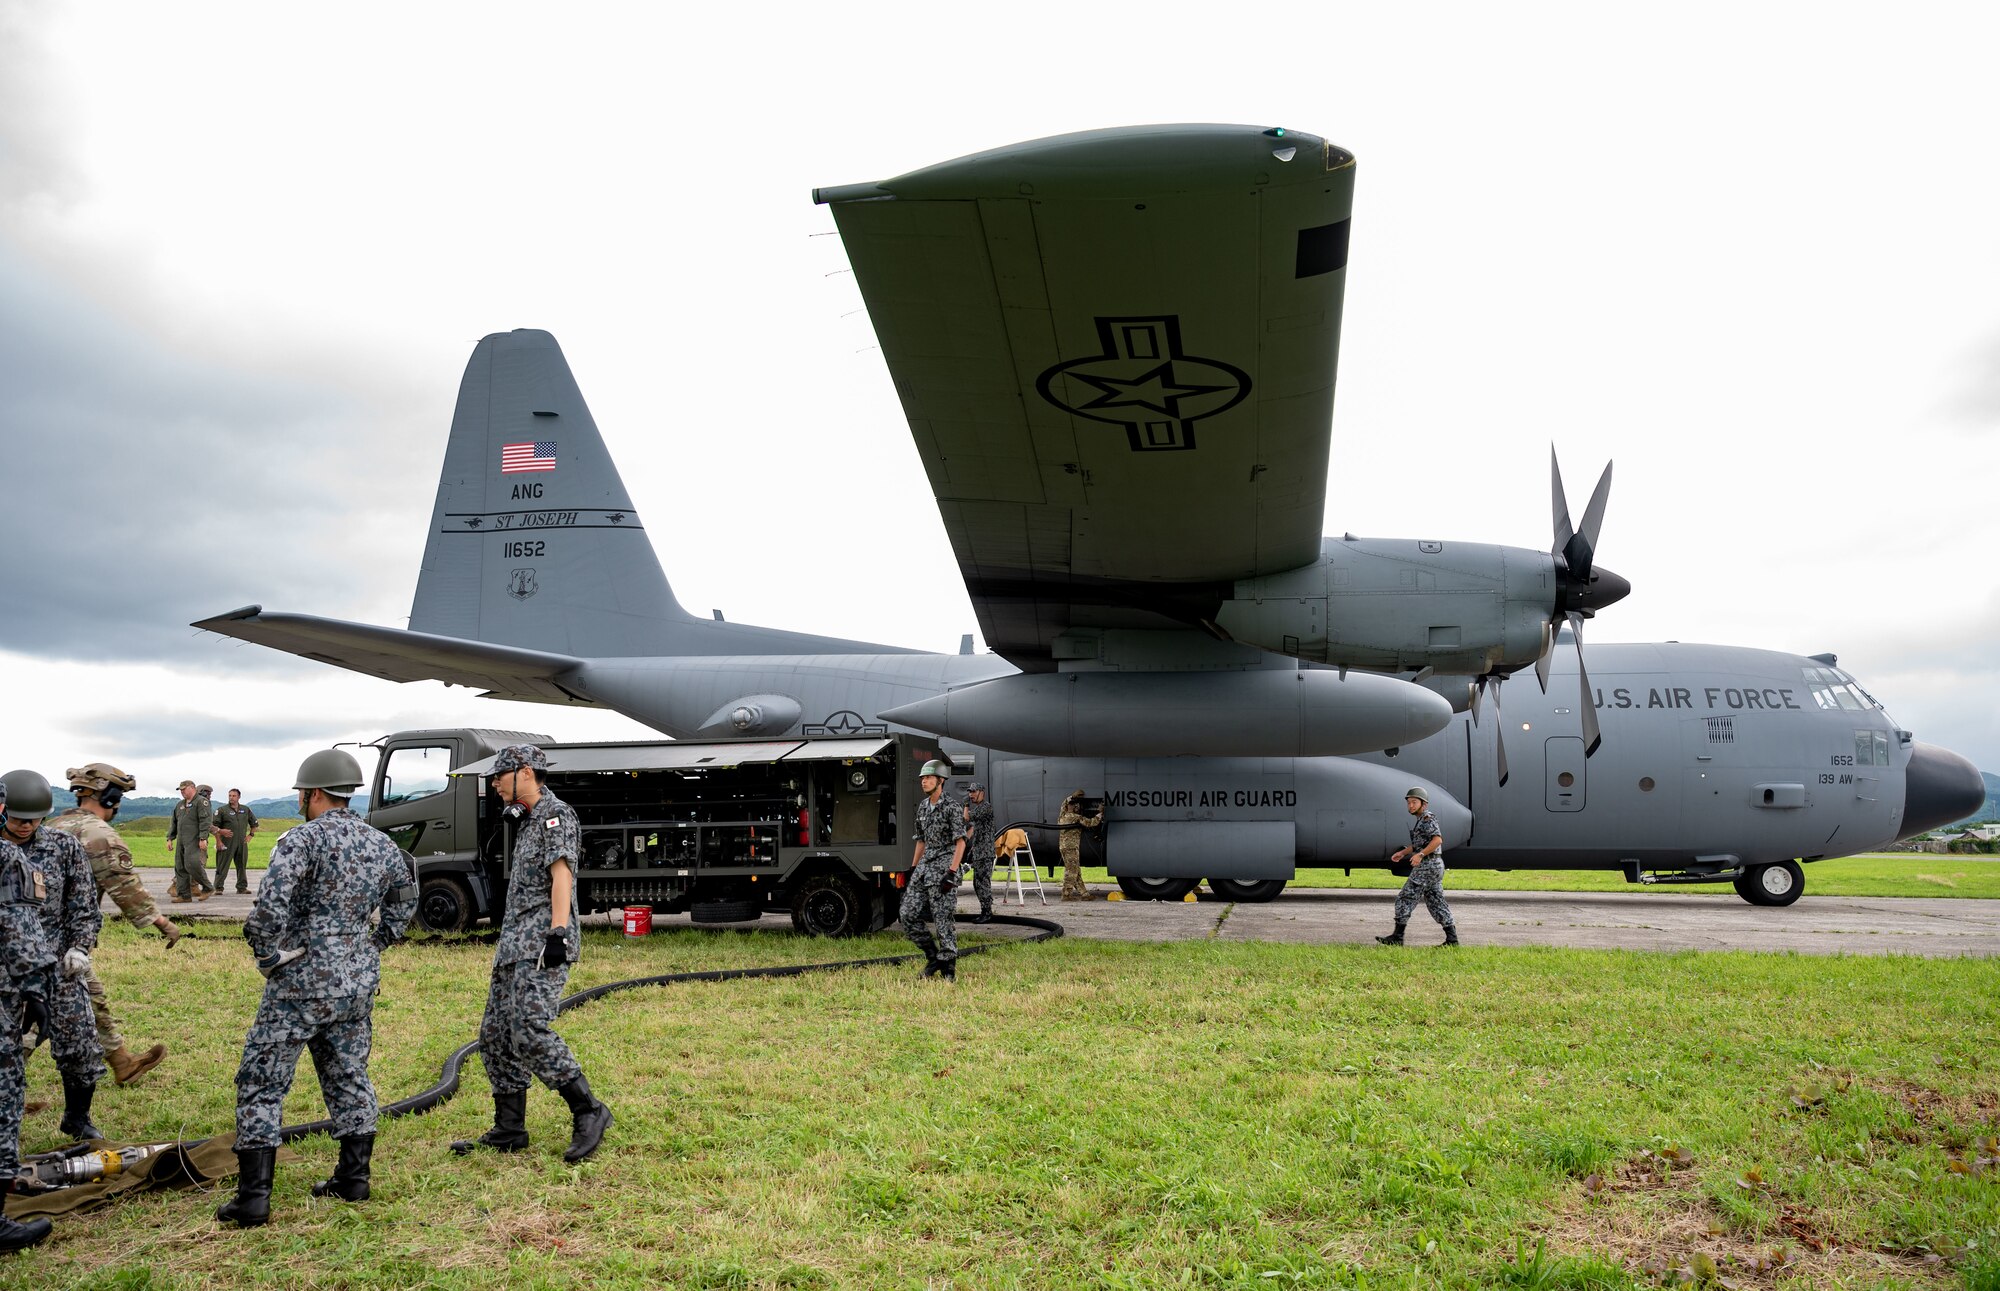 A team of Japanese Air Self-Defense Force members prepare for a specialized fuel operation on a C-130 Hercules in support of Mobility Guardian 2023 at Yakumo sub-base, Japan, July 13, 2023. A multilateral endeavor, MG23 features seven participating countries - Australia, Canada, France, Japan, New Zealand, United Kingdom, and the United States - Operating approximately 70 mobility aircraft across multiple locations spanning a 3,000 miles exercise are from July 5 through July 21.